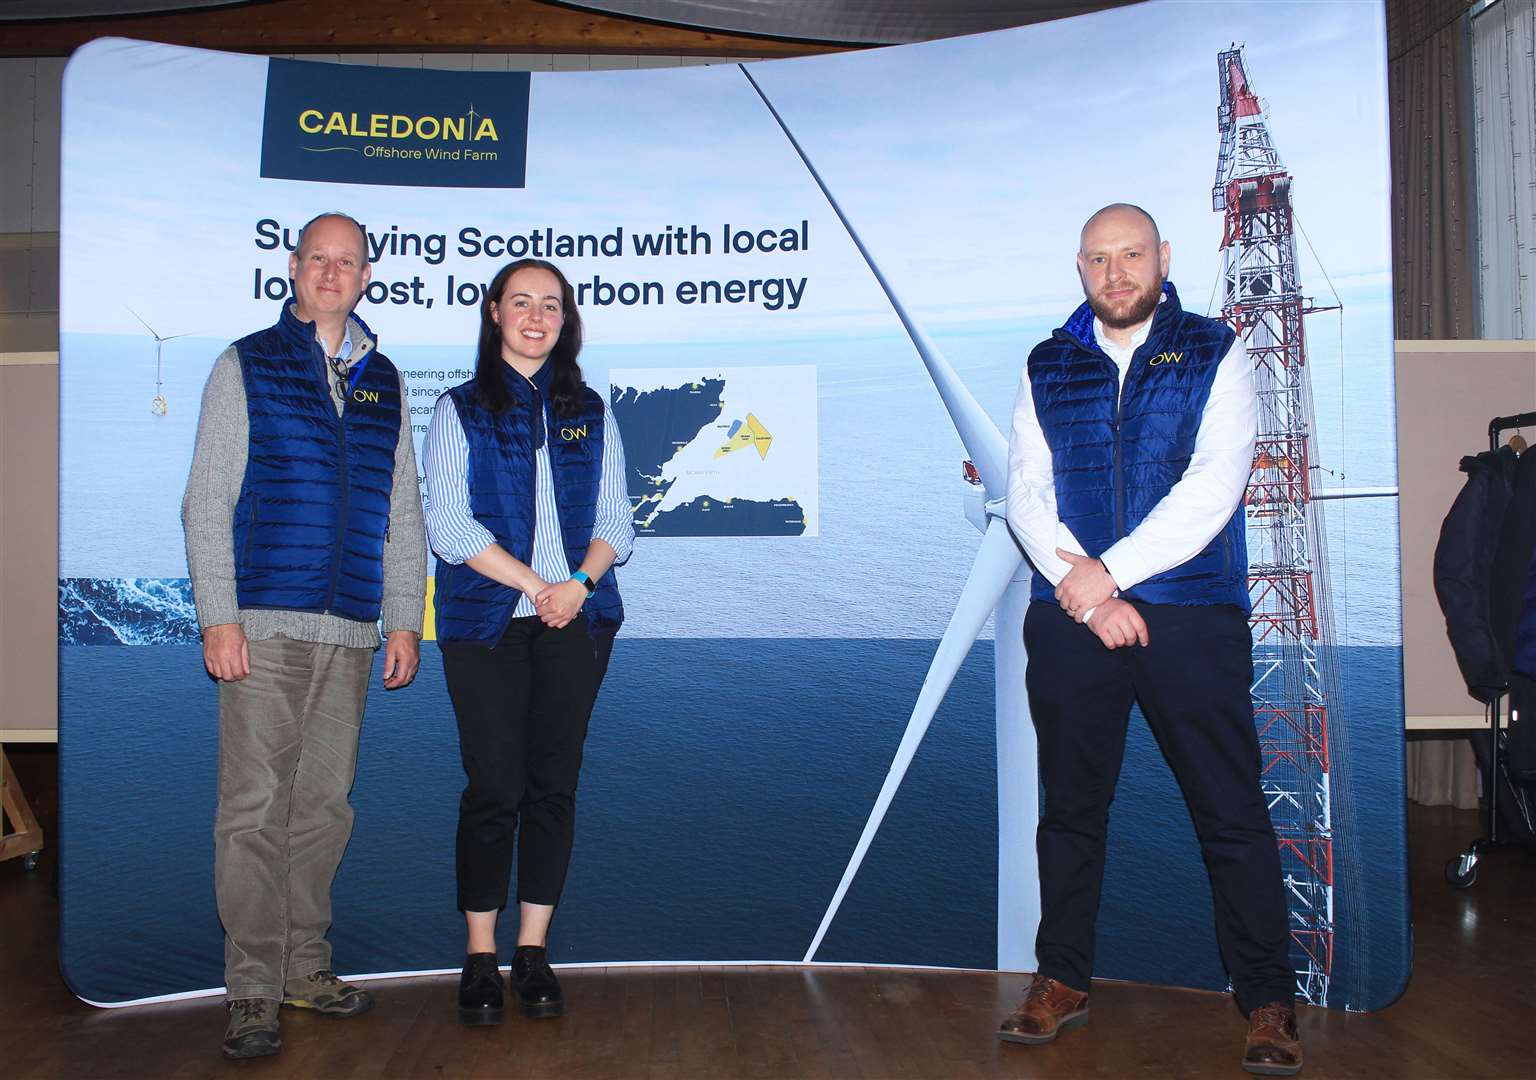 Ian Adams, Jennifer Stavert and Andrew Hamilton from the Caledonia Offshore Wind Farm team at last month's public consultation event in Wick. Picture: Alan Hendry